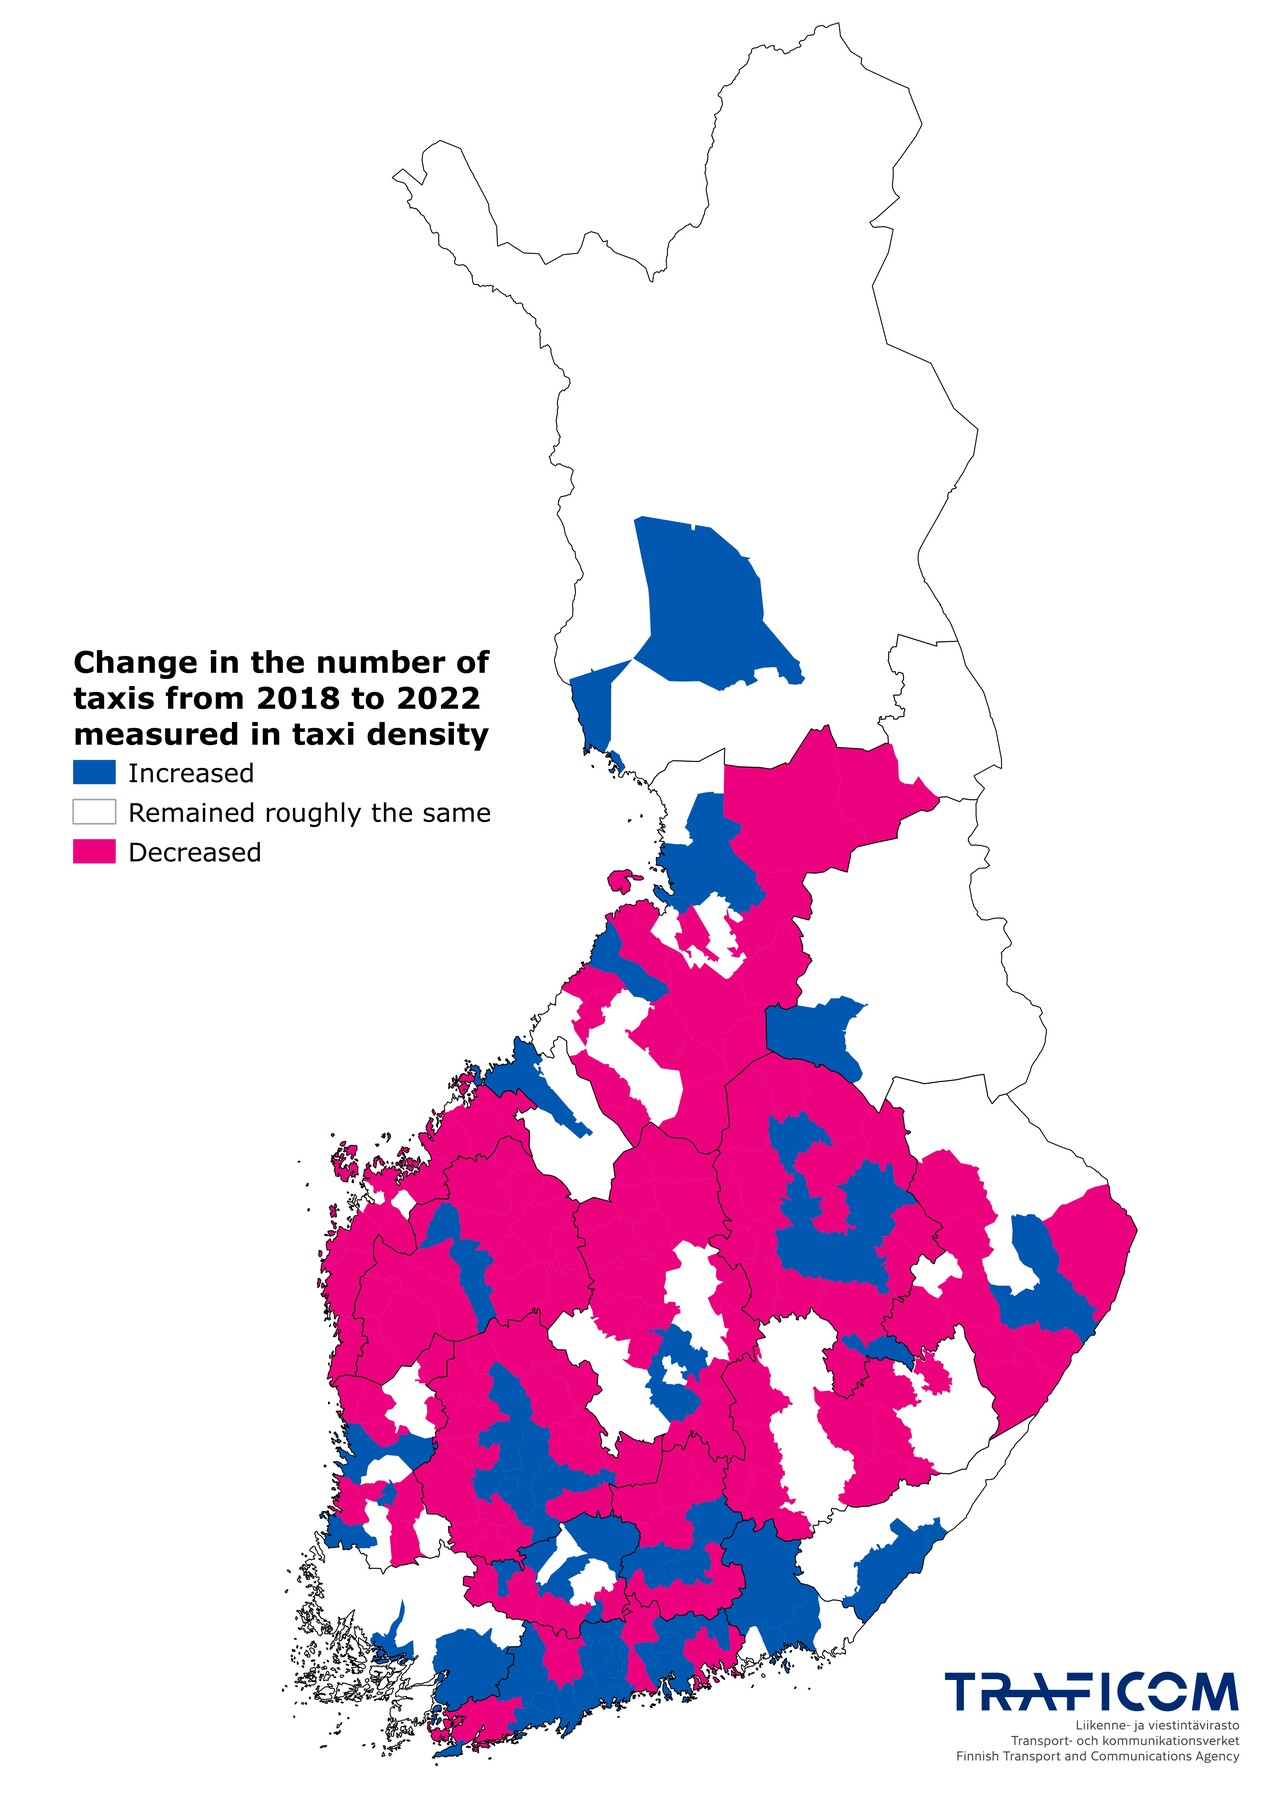 Change in the number of taxis from 2018 to 2022 measured in taxi density on the map of Finland